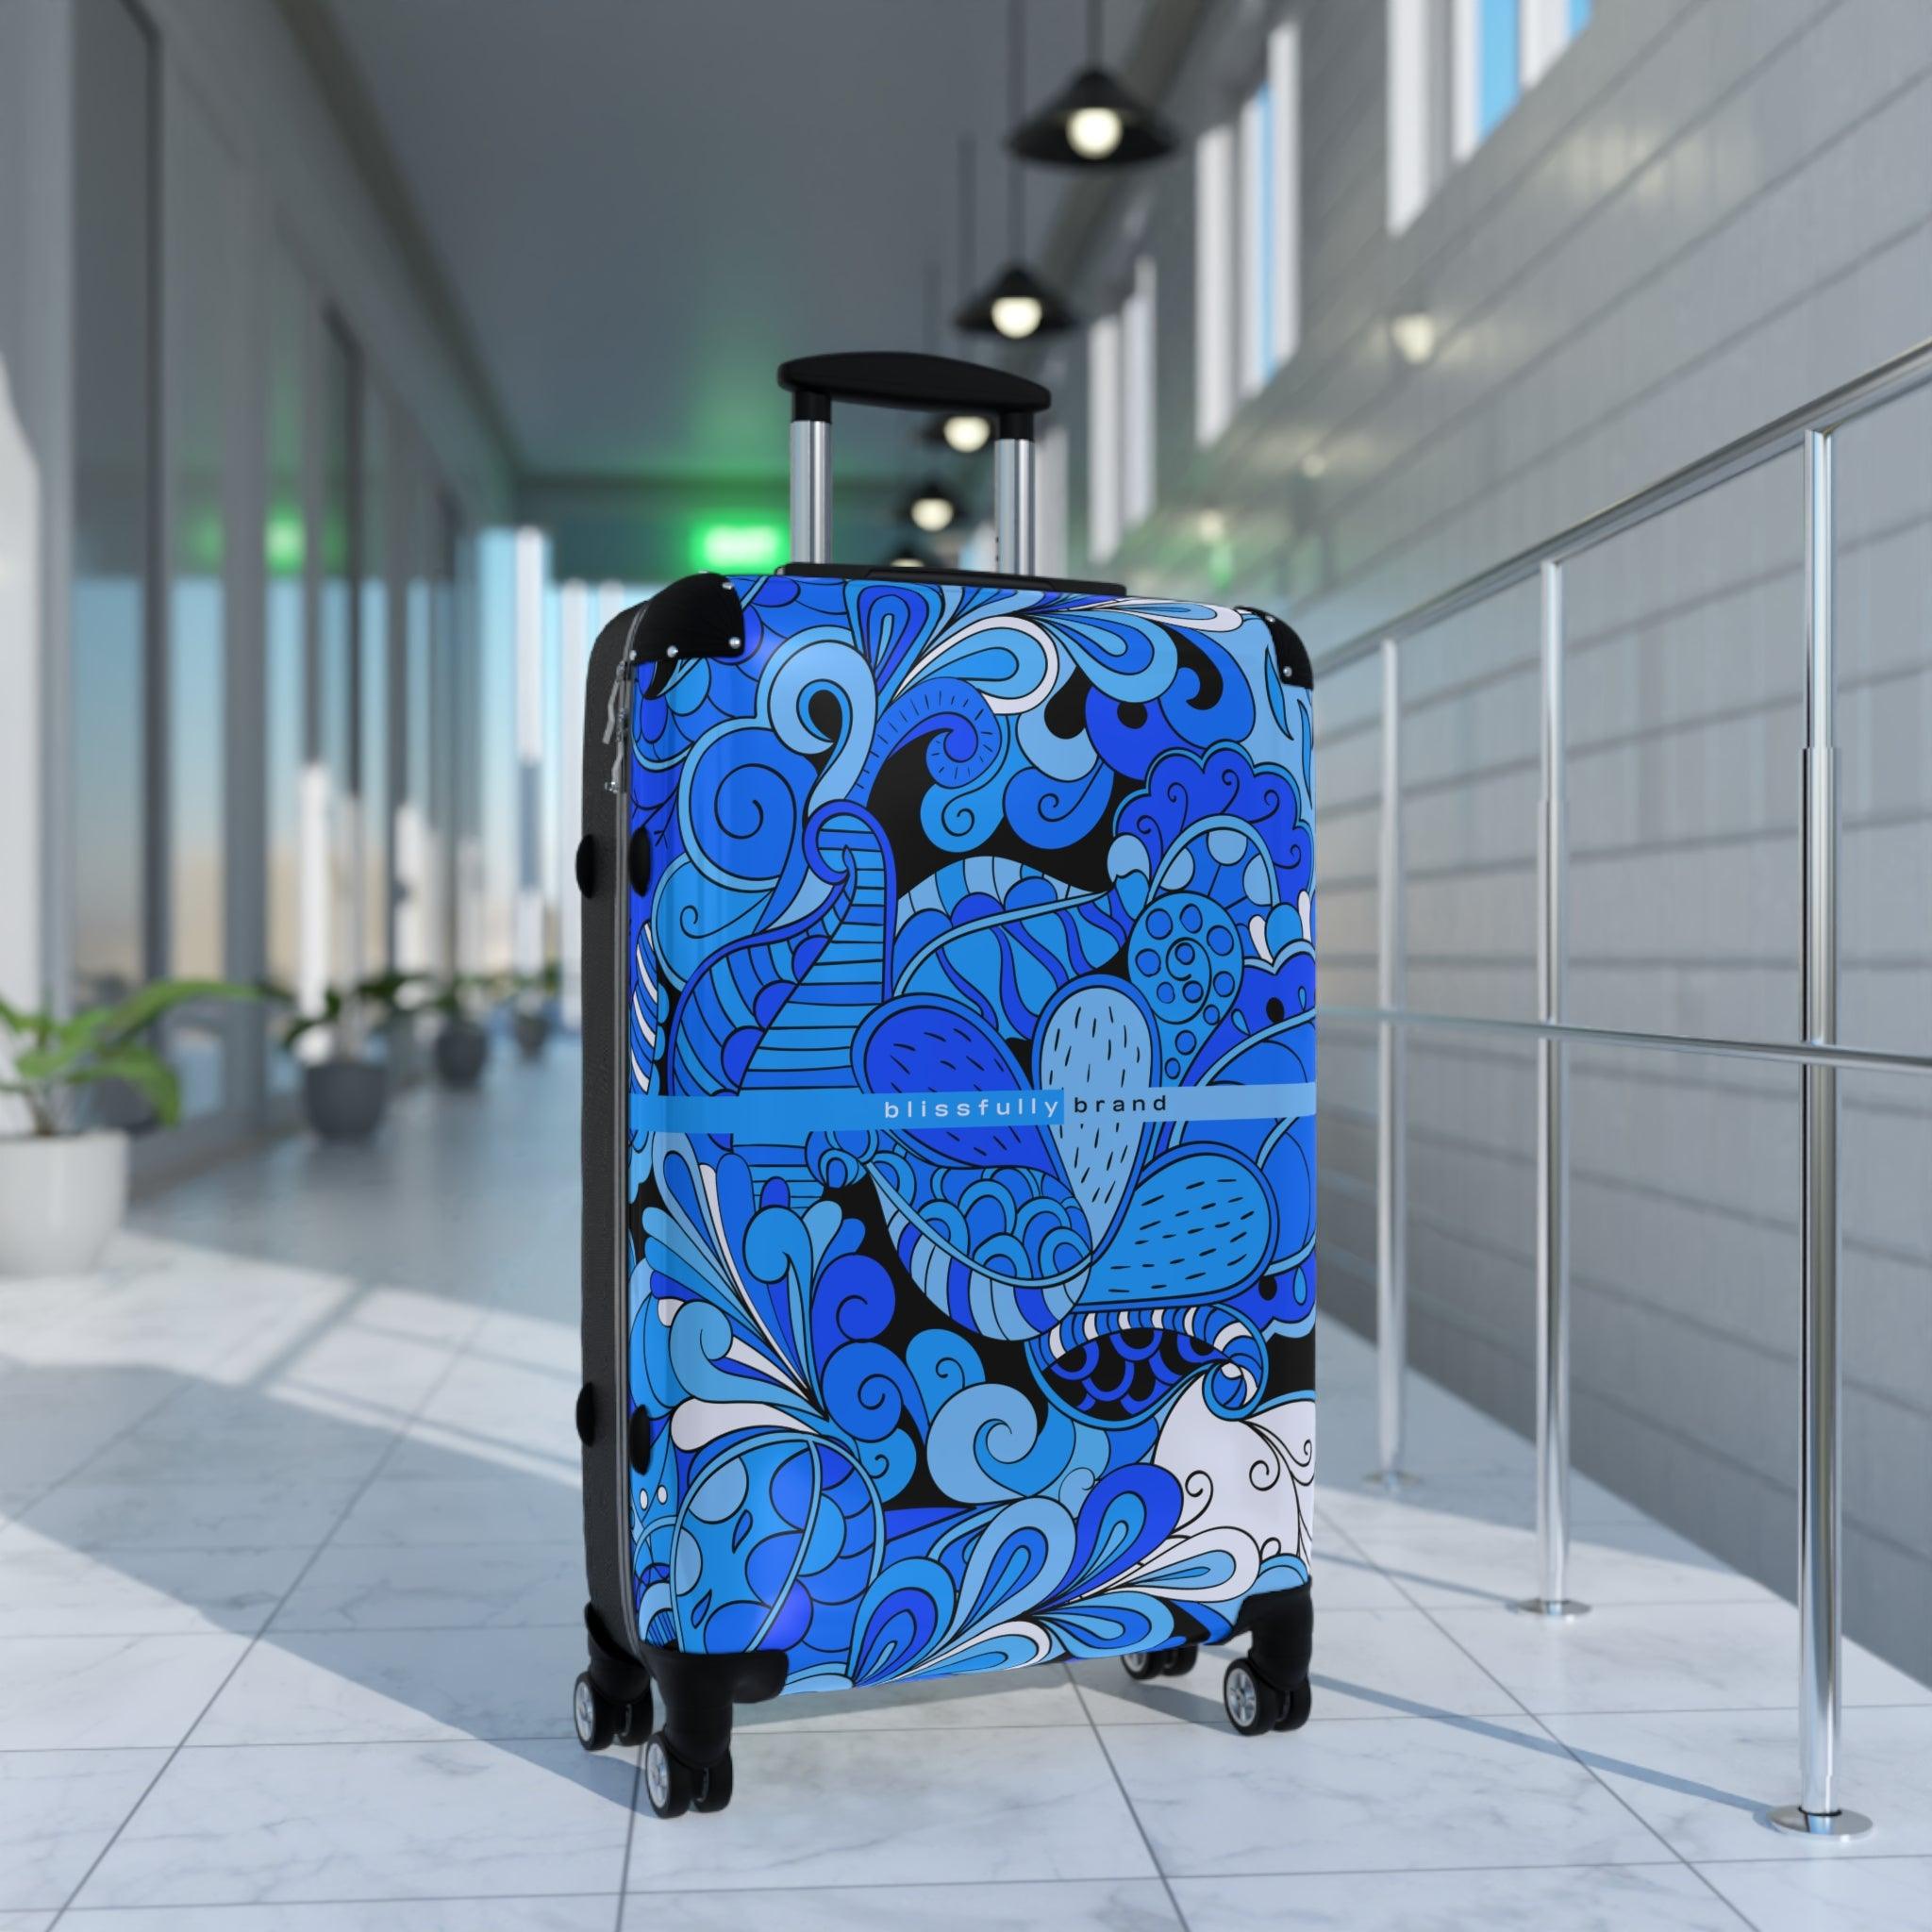 Ima Luggage Collection - Abstract Kaleidoscope Paisley Floral Print Psychedelic Retro Swirls Funky Multicolor Check in Carry On Roller 360 Hard Shell Unique Retro Vibrant Bold Blue